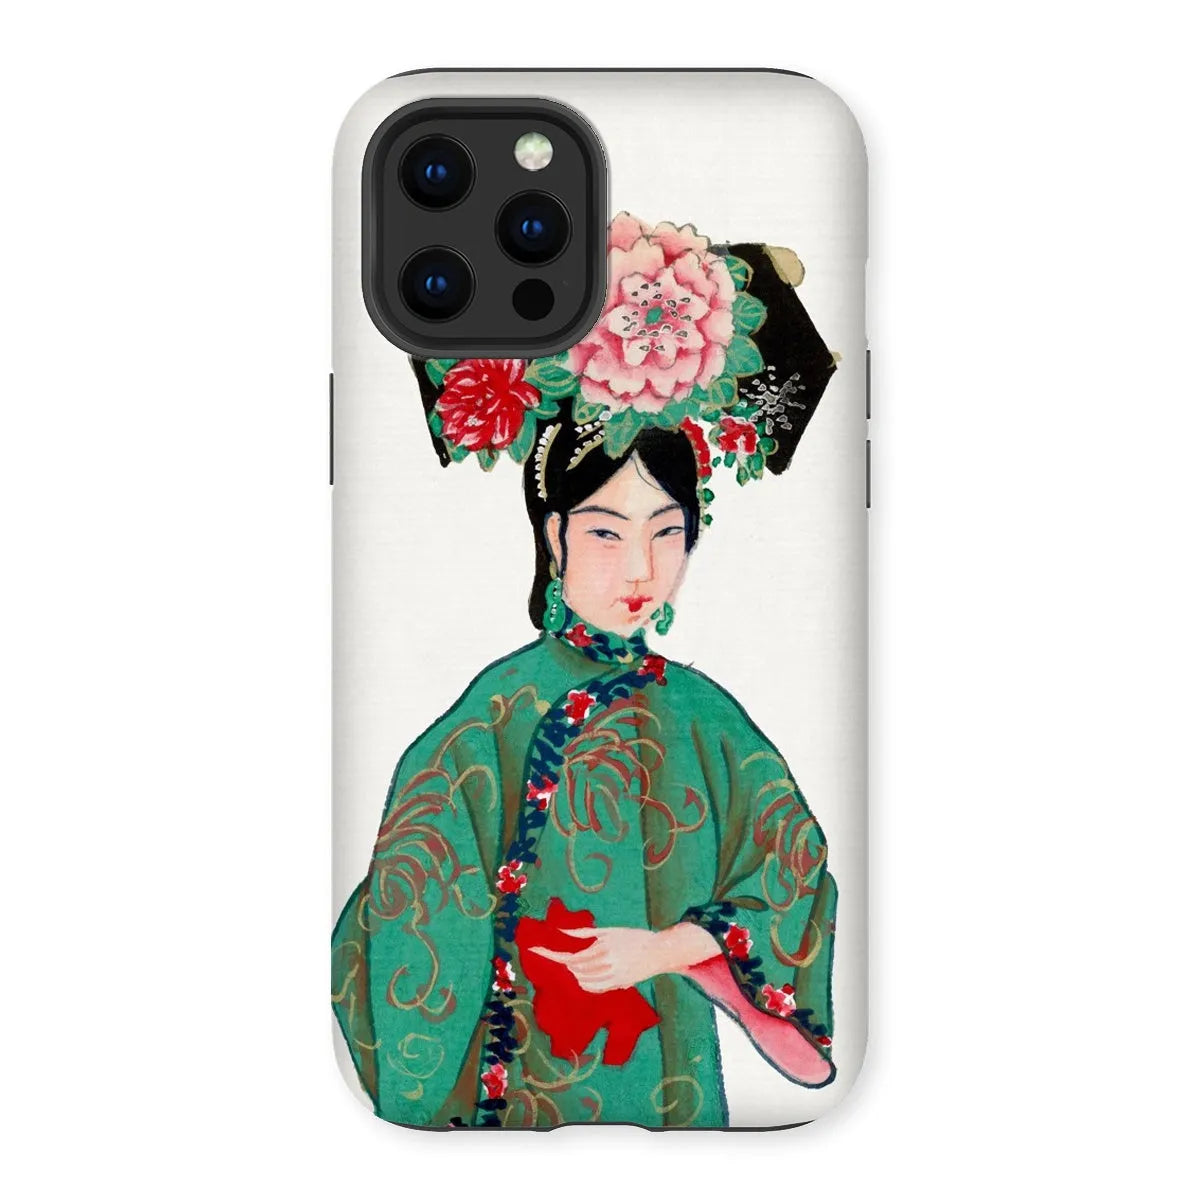 Chinese Noblewoman In Manchu Couture Art Phone Case - Iphone 12 Pro Max / Matte - Mobile Phone Cases - Aesthetic Art